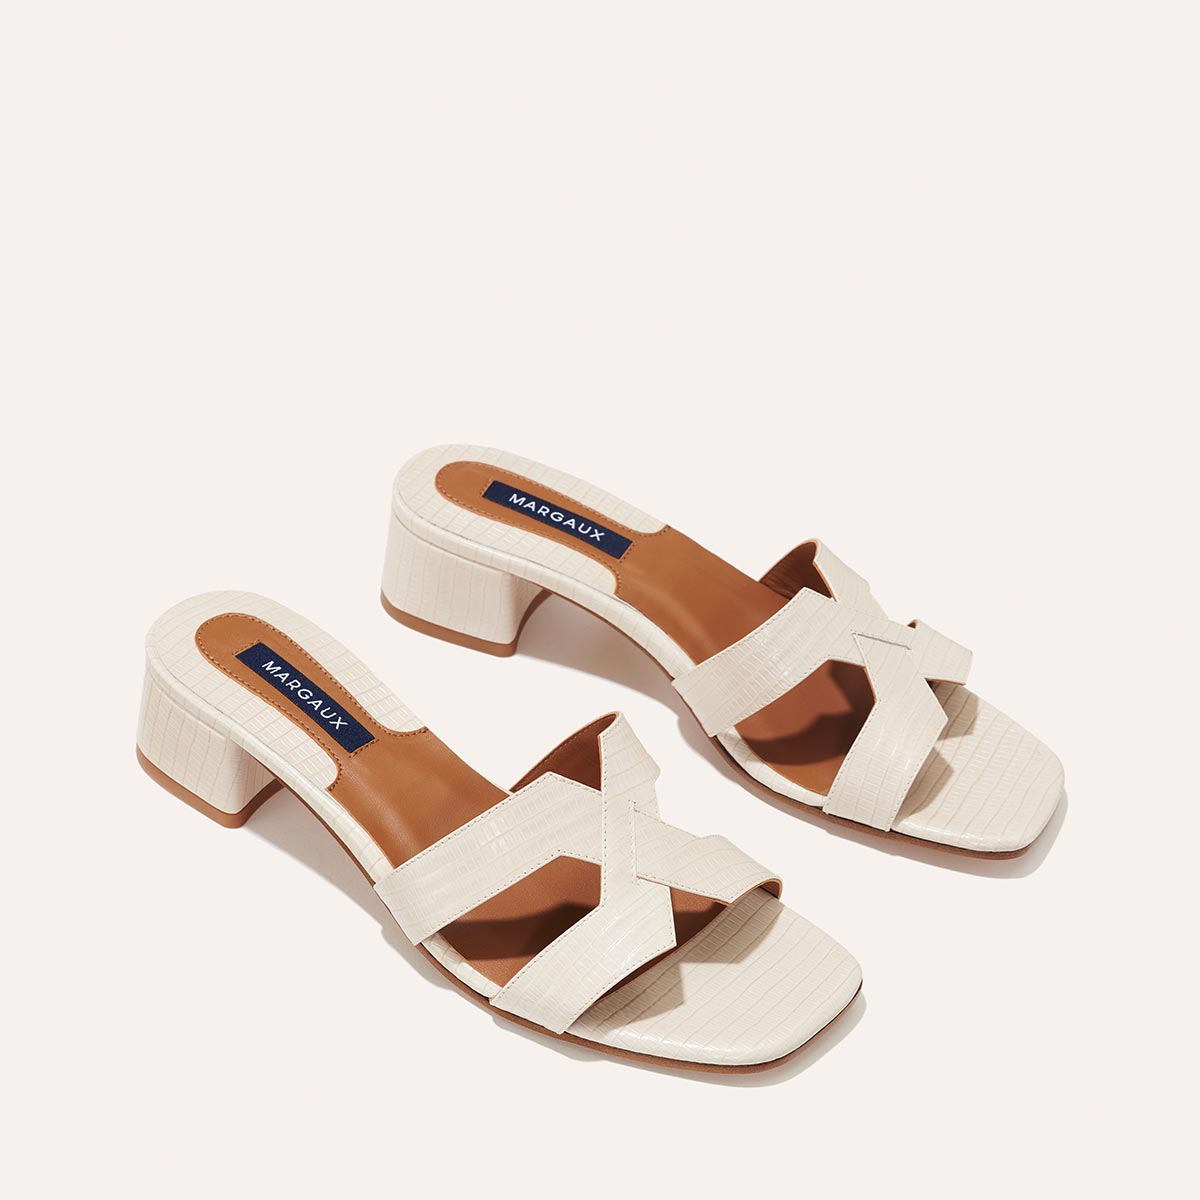 Margaux's classic and comfortable MX 35 Sandal, made in Spain from ecru lizard-embossed Italian leather with a walkable block heel